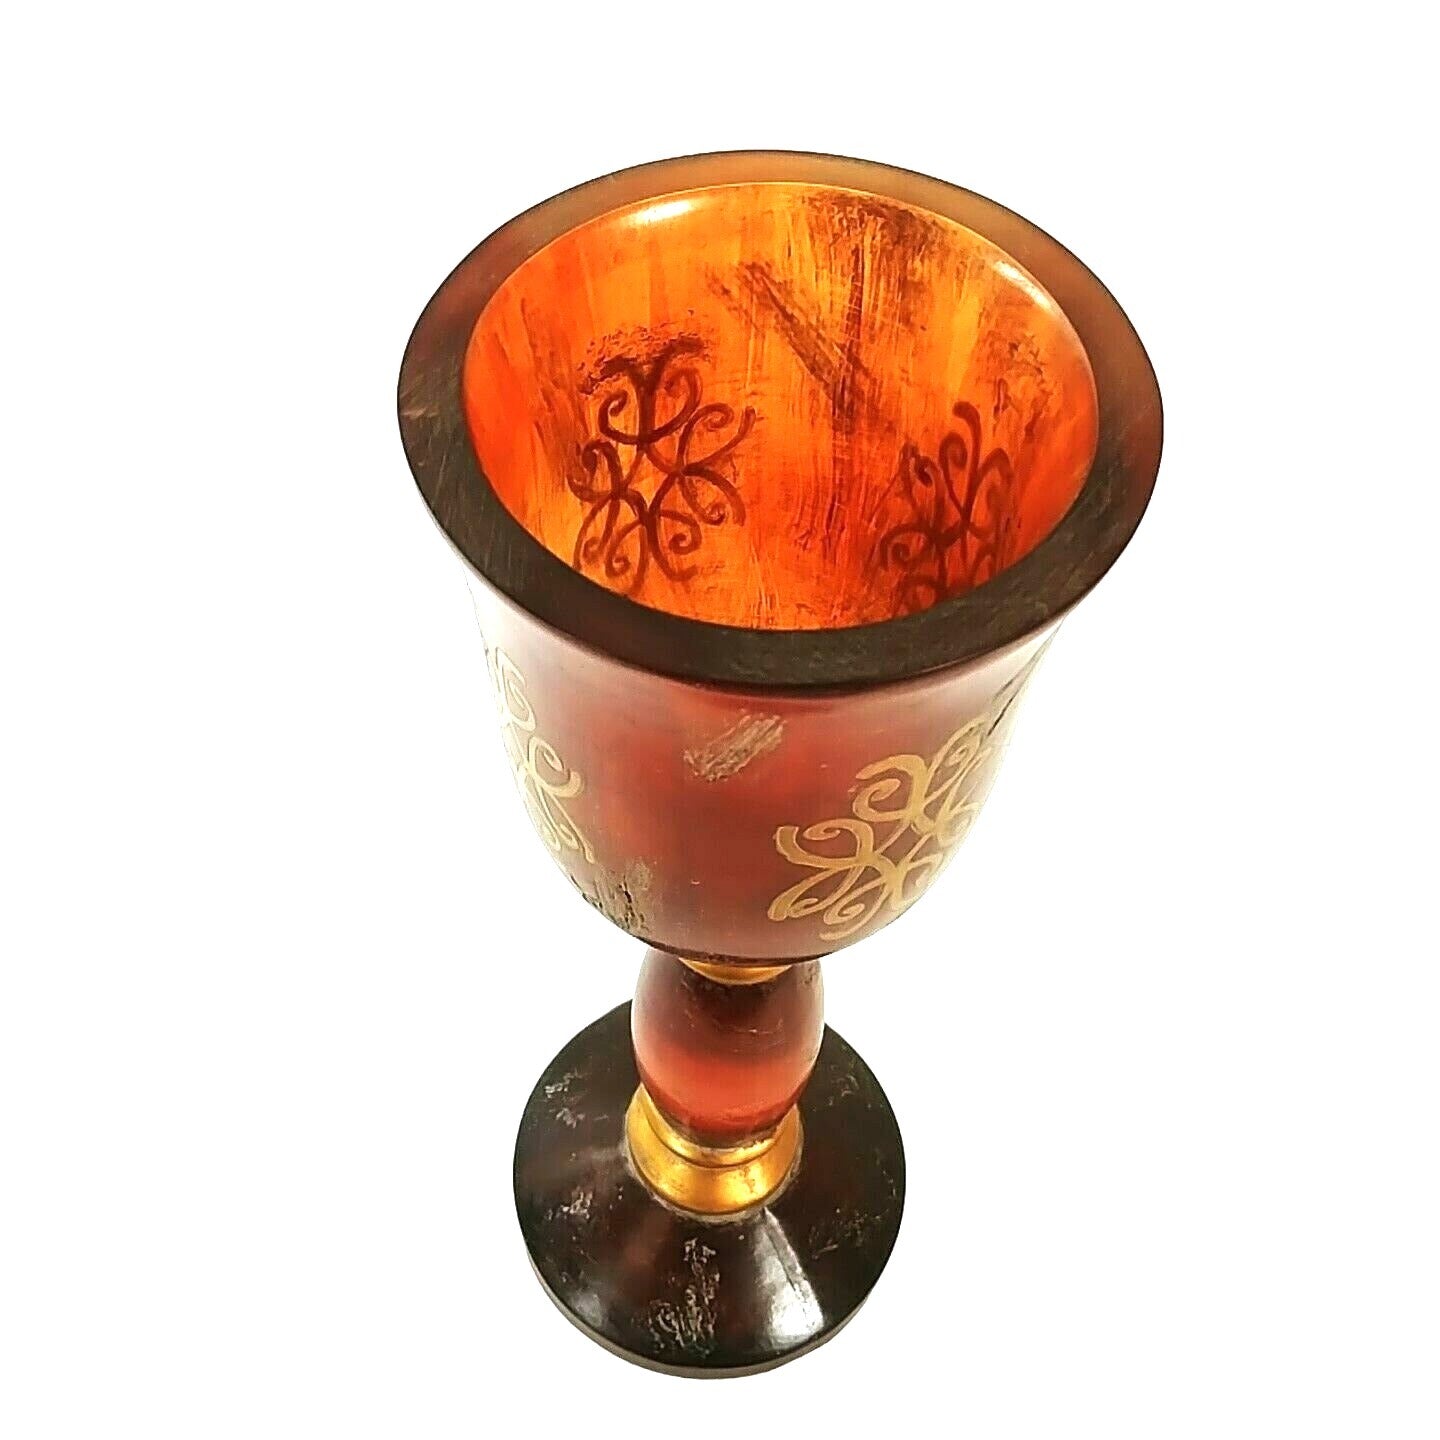 Candle Holder Transparent Amber Stemmed Table Decor 16" Tall Uttermost by Design